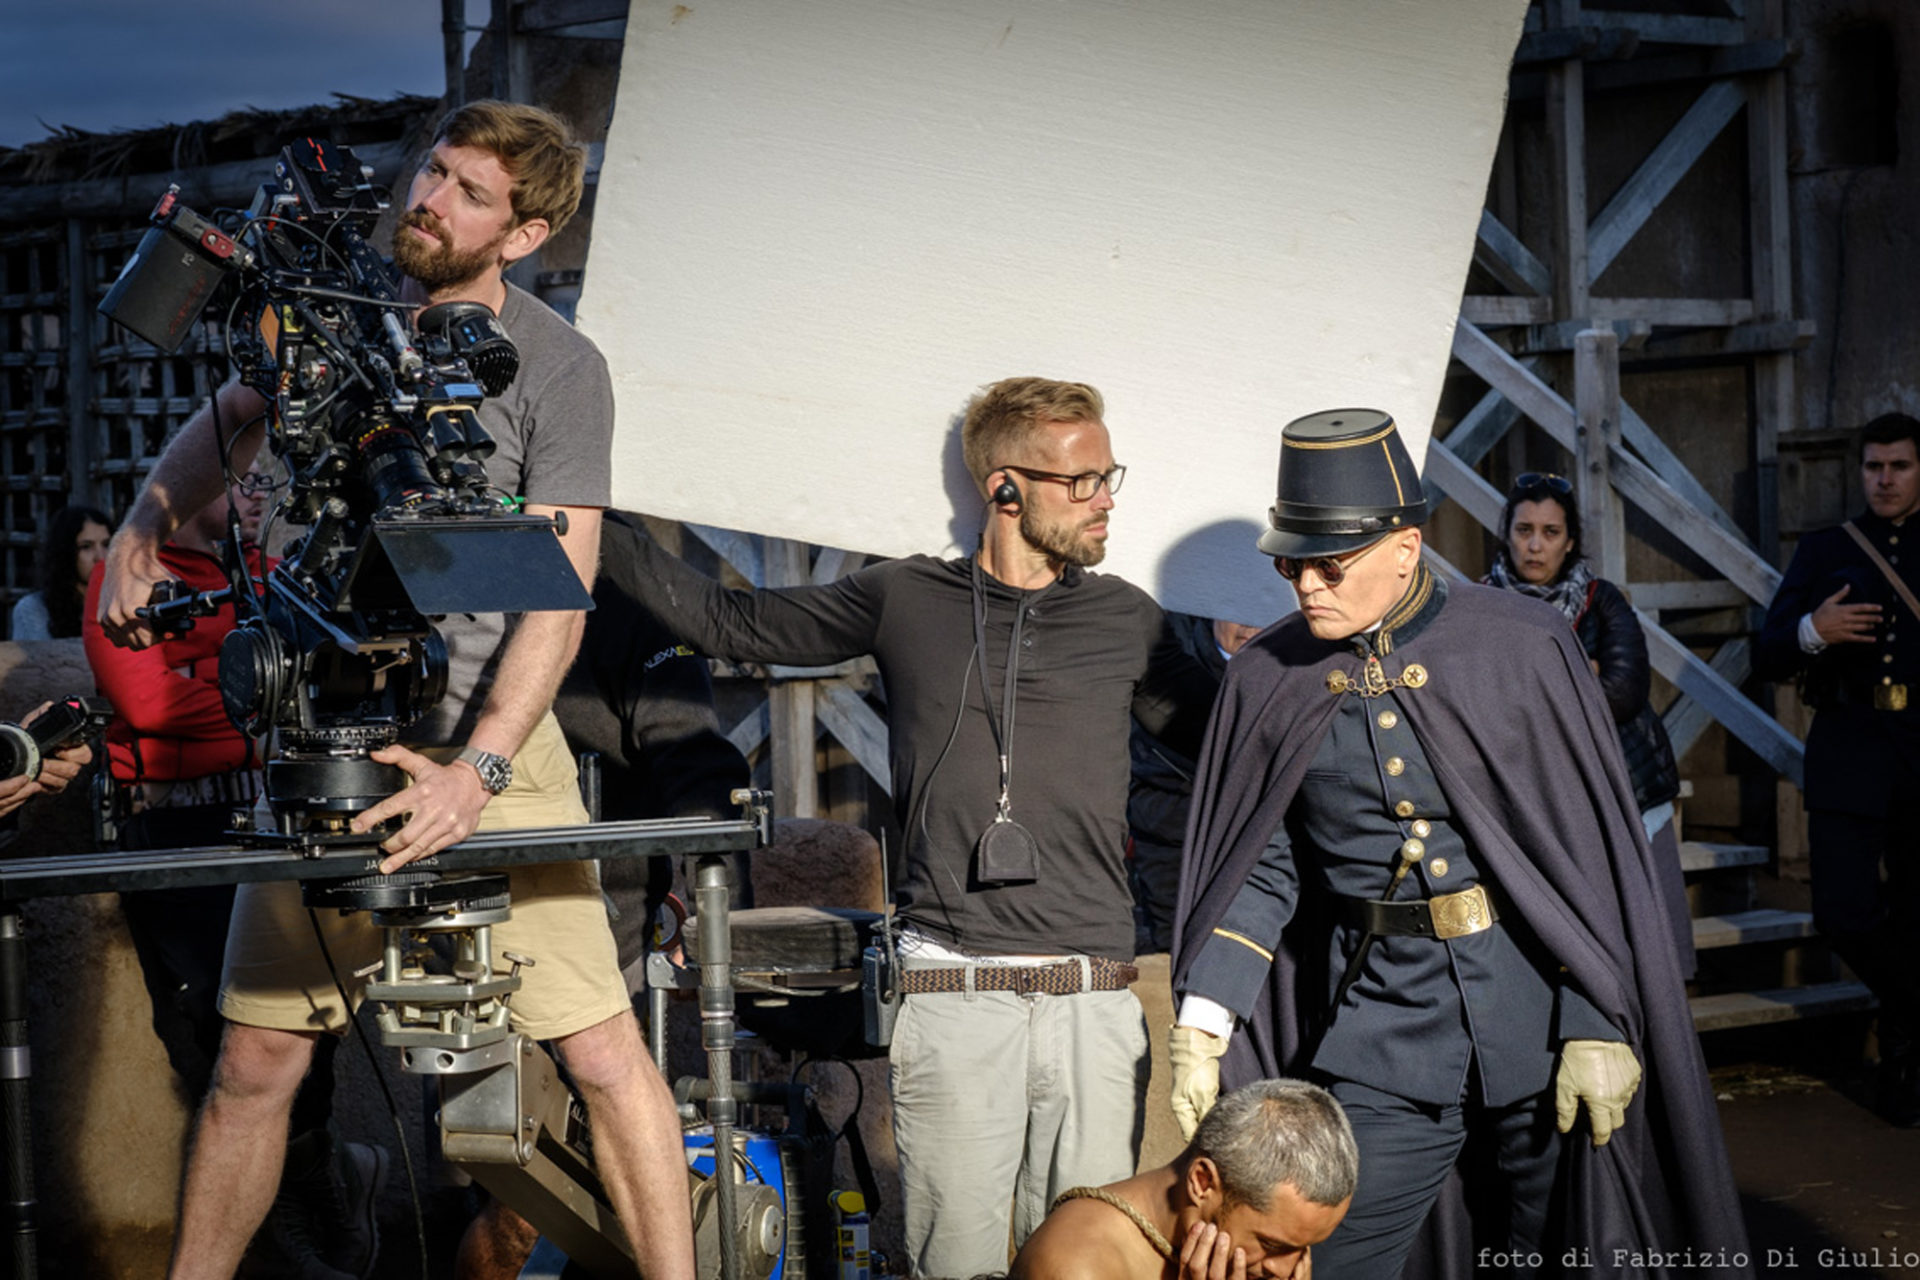 Working with Johnny Depp on <em>Waiting for the Barbarians</em>. Photo: Fabrizio Di Giullio